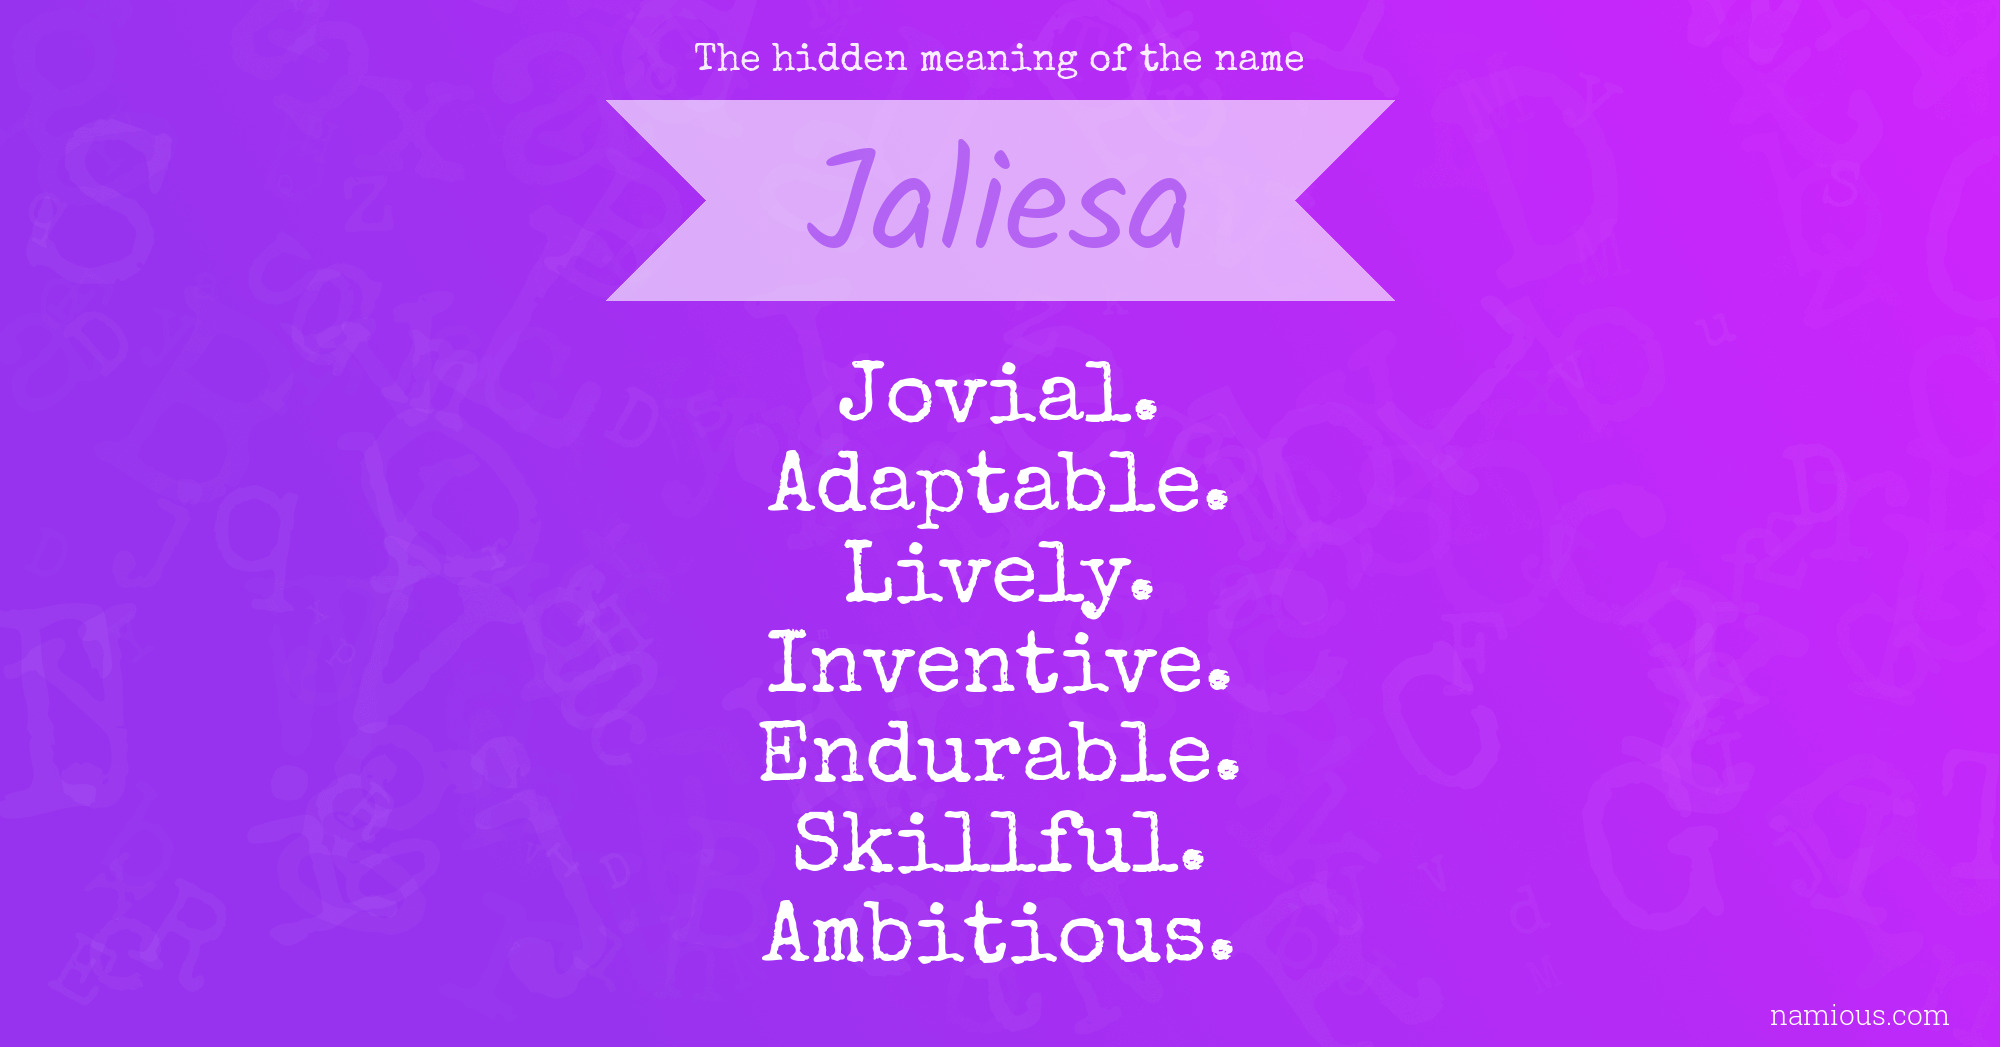 The hidden meaning of the name Jaliesa